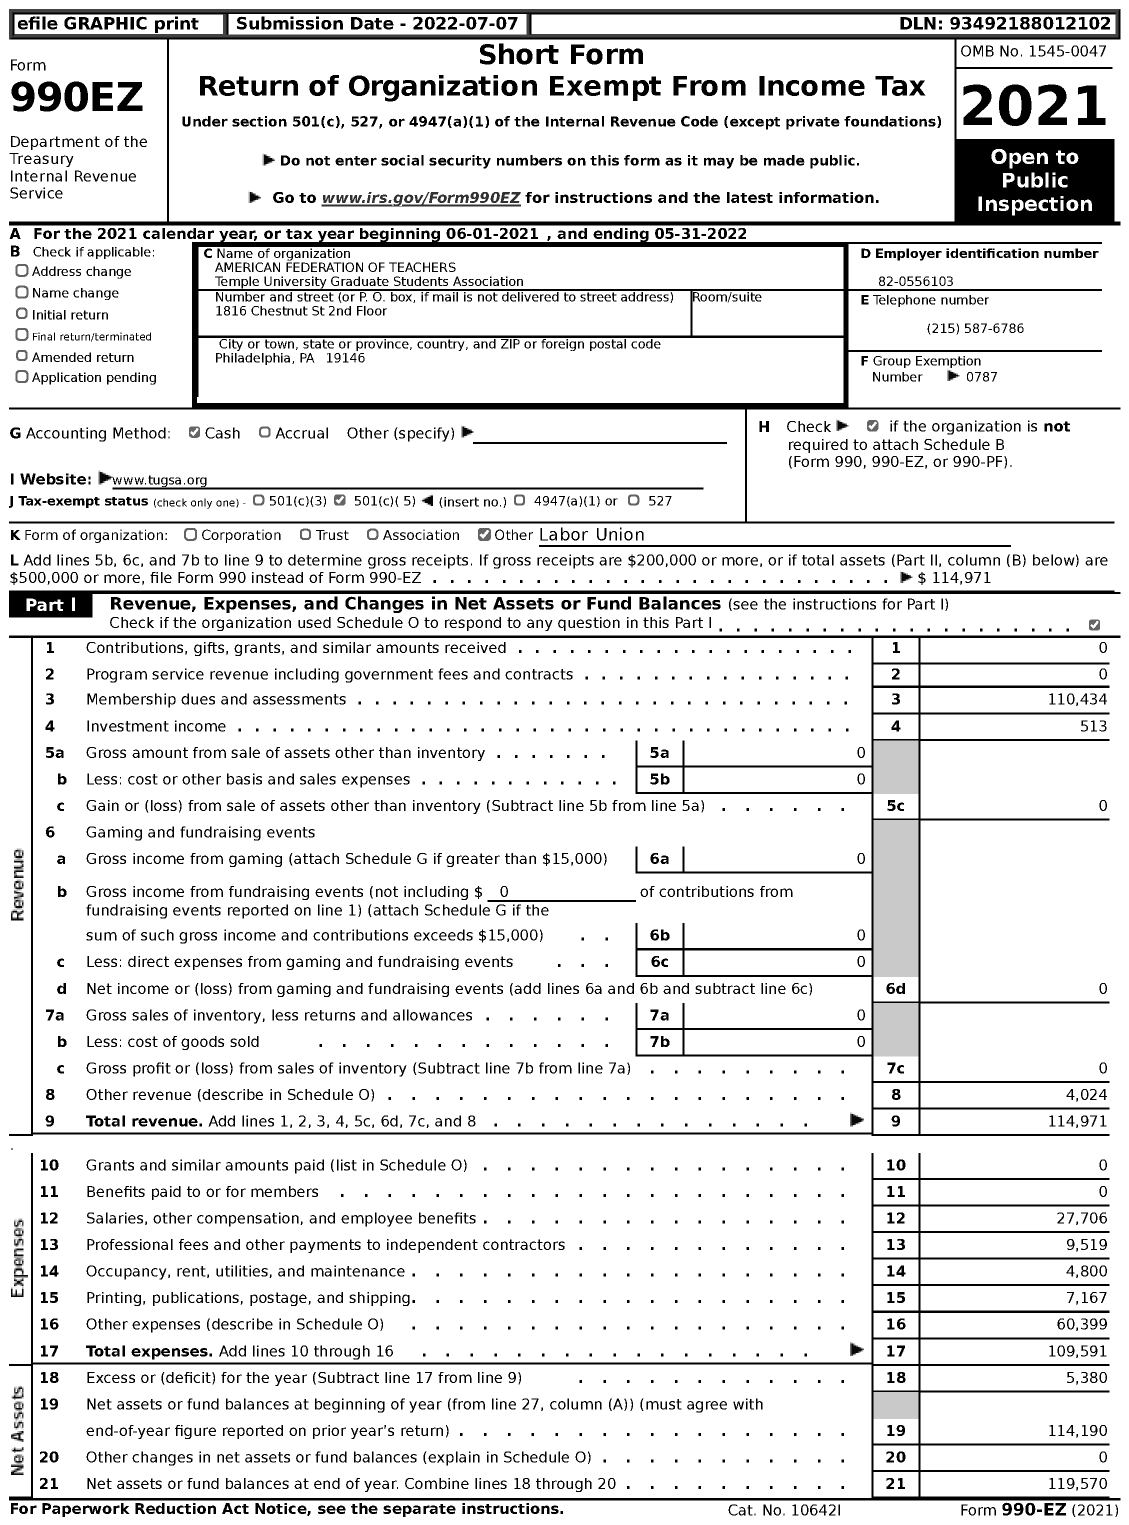 Image of first page of 2021 Form 990EZ for AMERICAN FEDERATION OF TEACHERS - Temple University Graduate Students Association AFT 6290